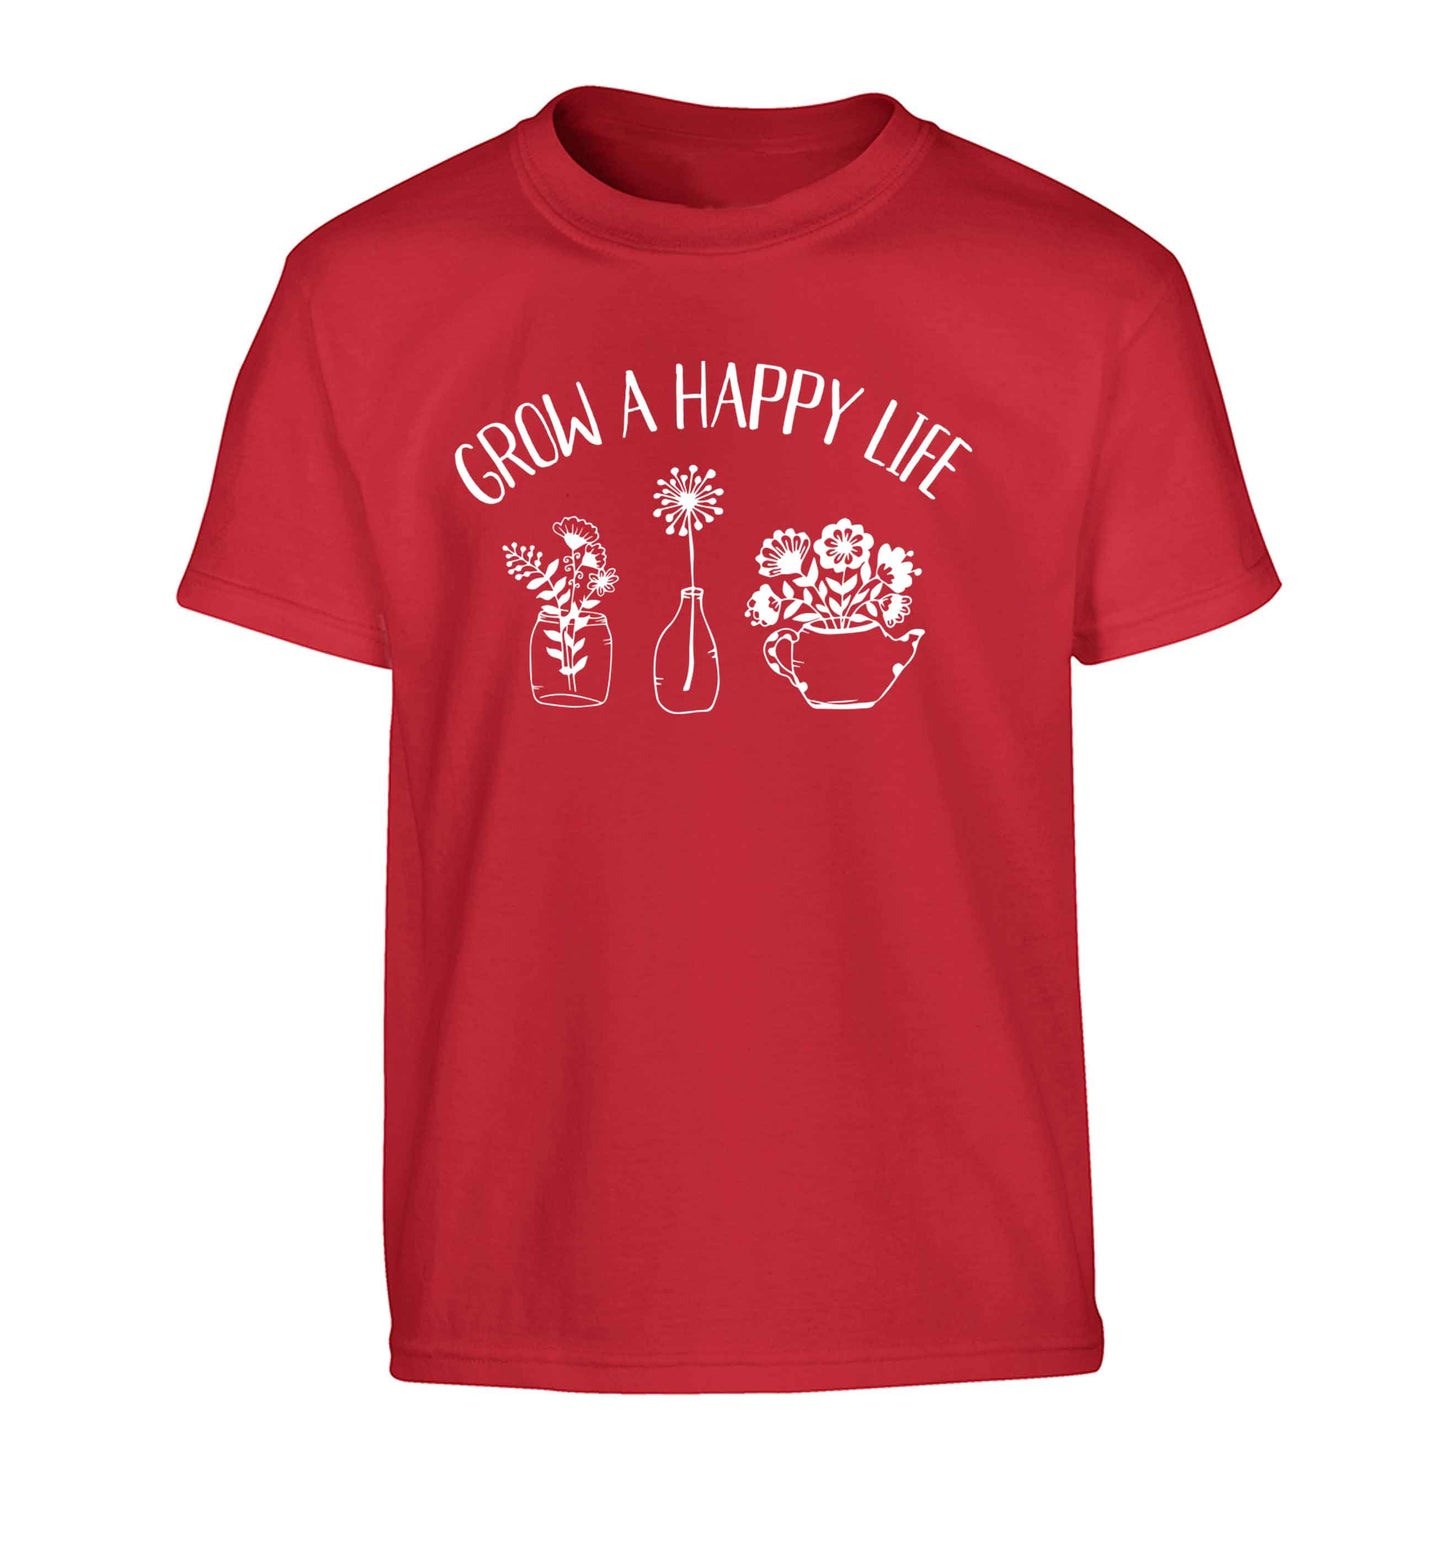 Grow a happy life Children's red Tshirt 12-13 Years